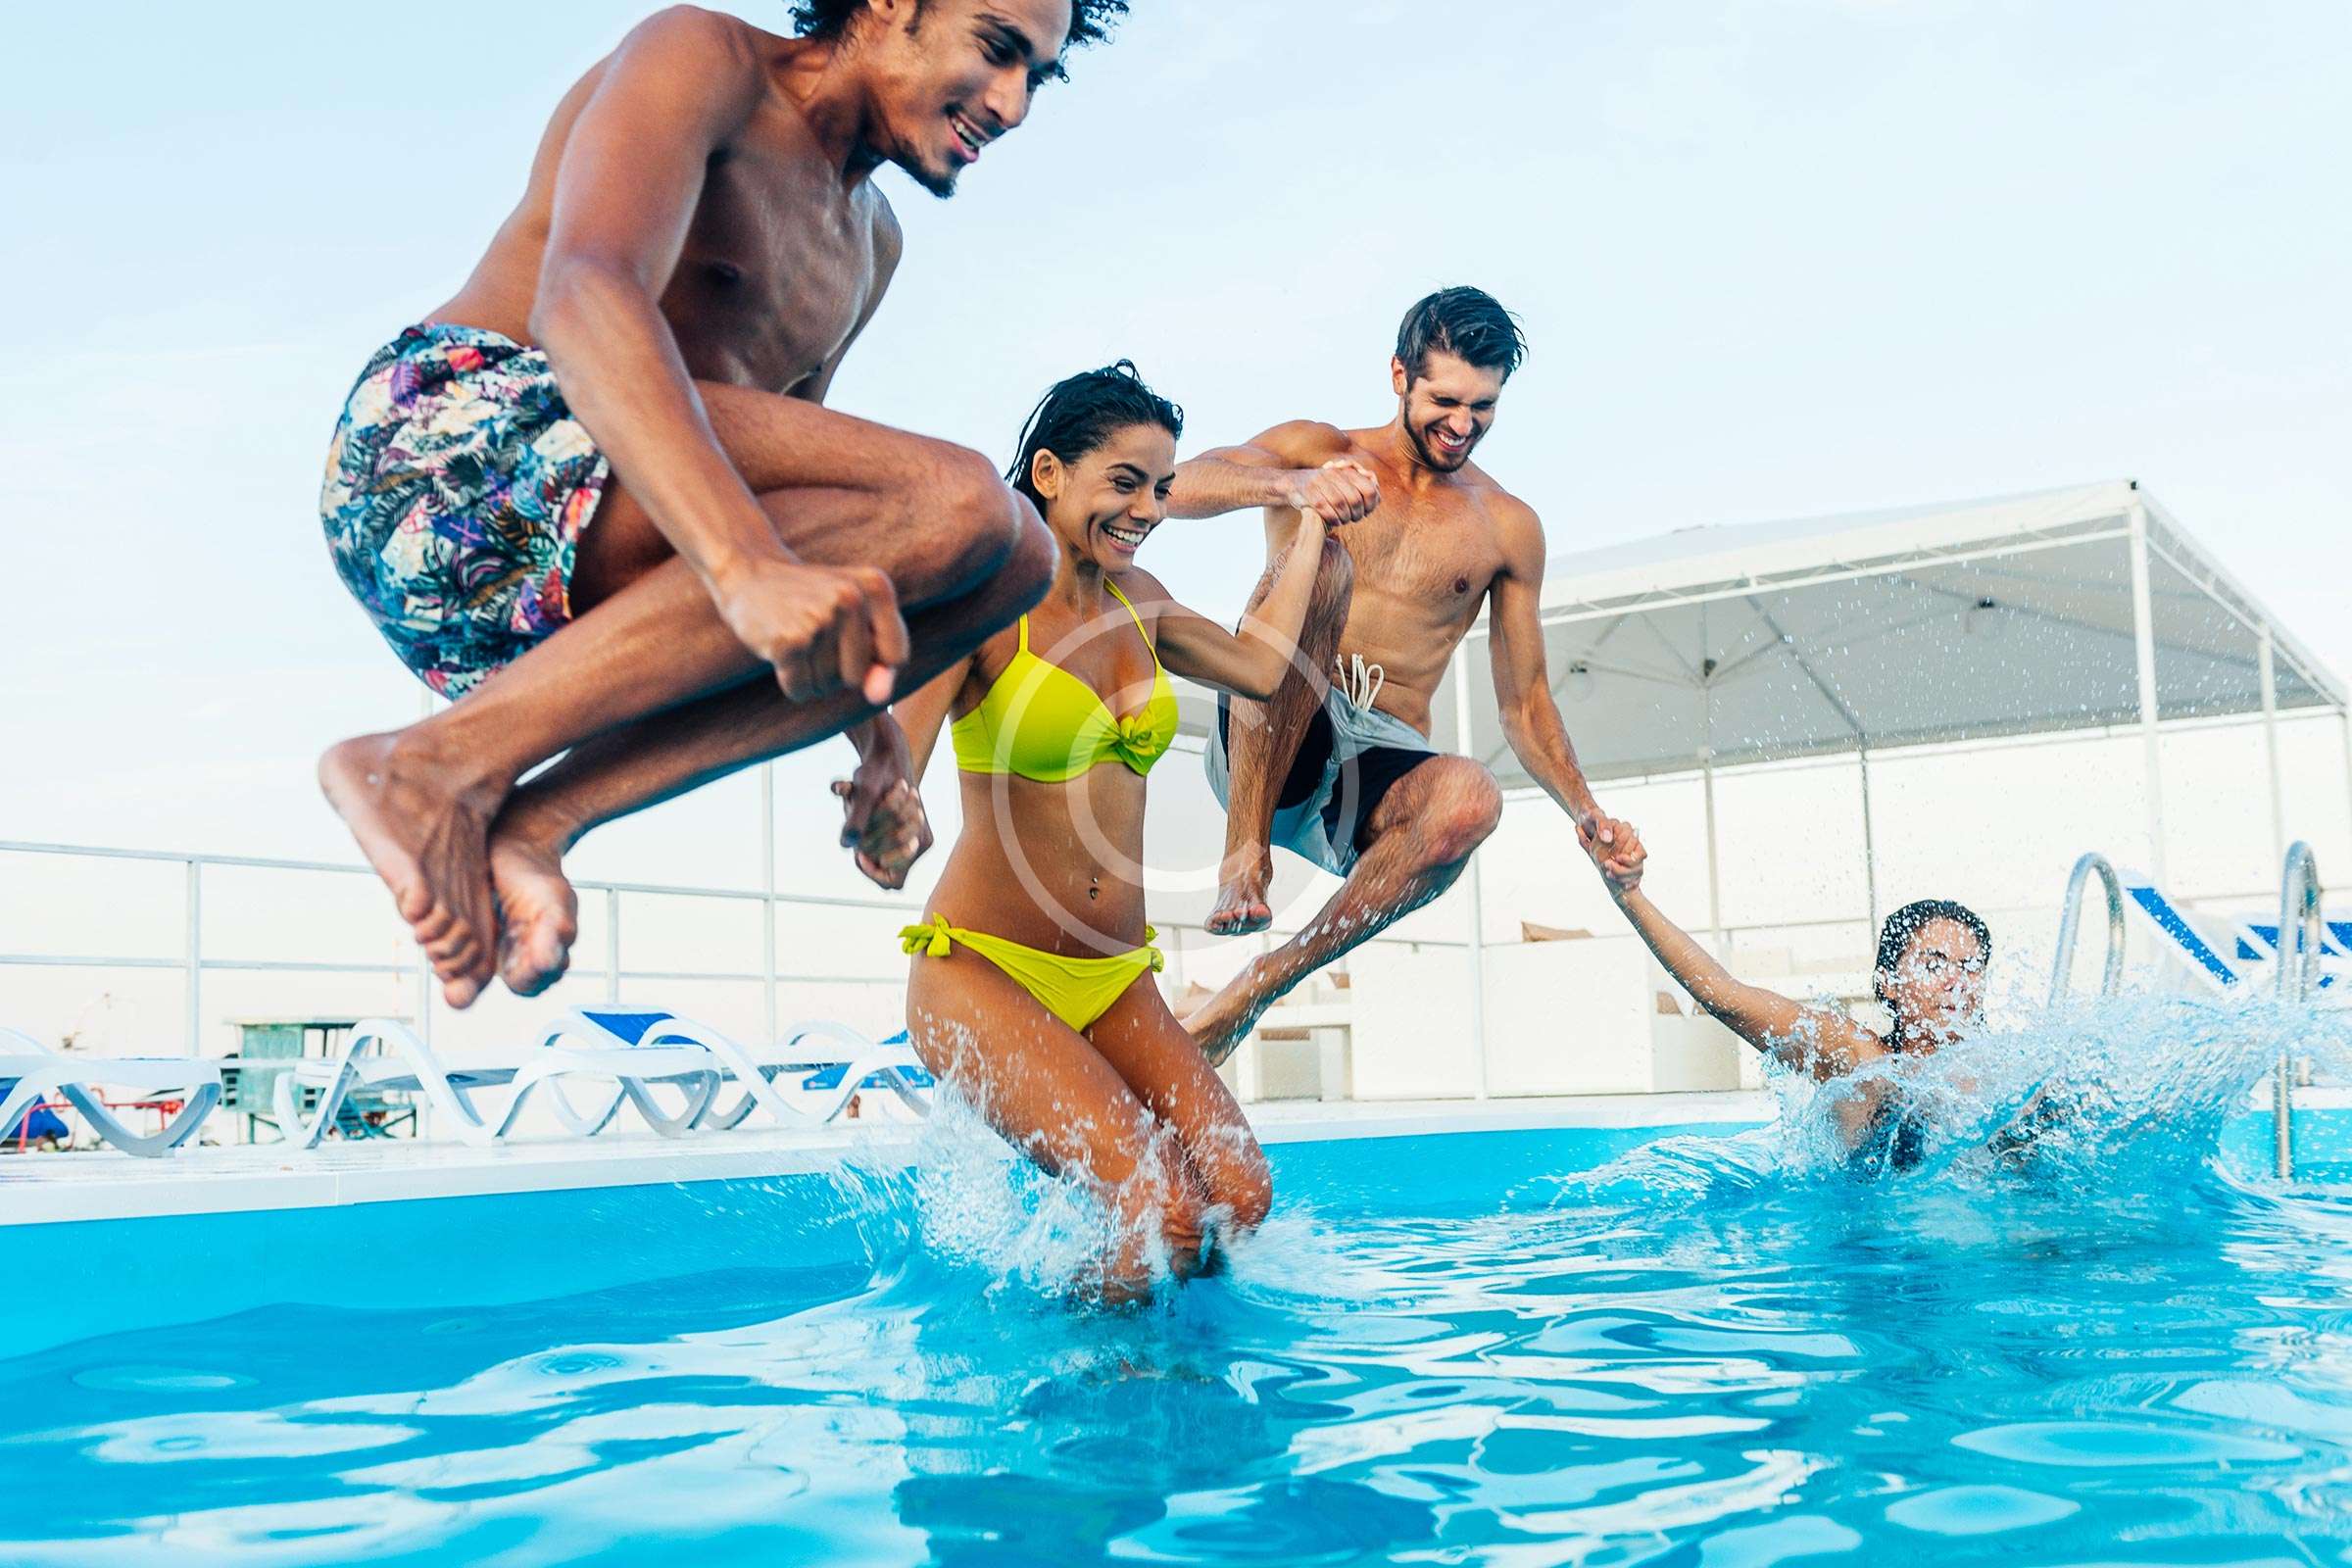 Four people are enjoying together, into pool